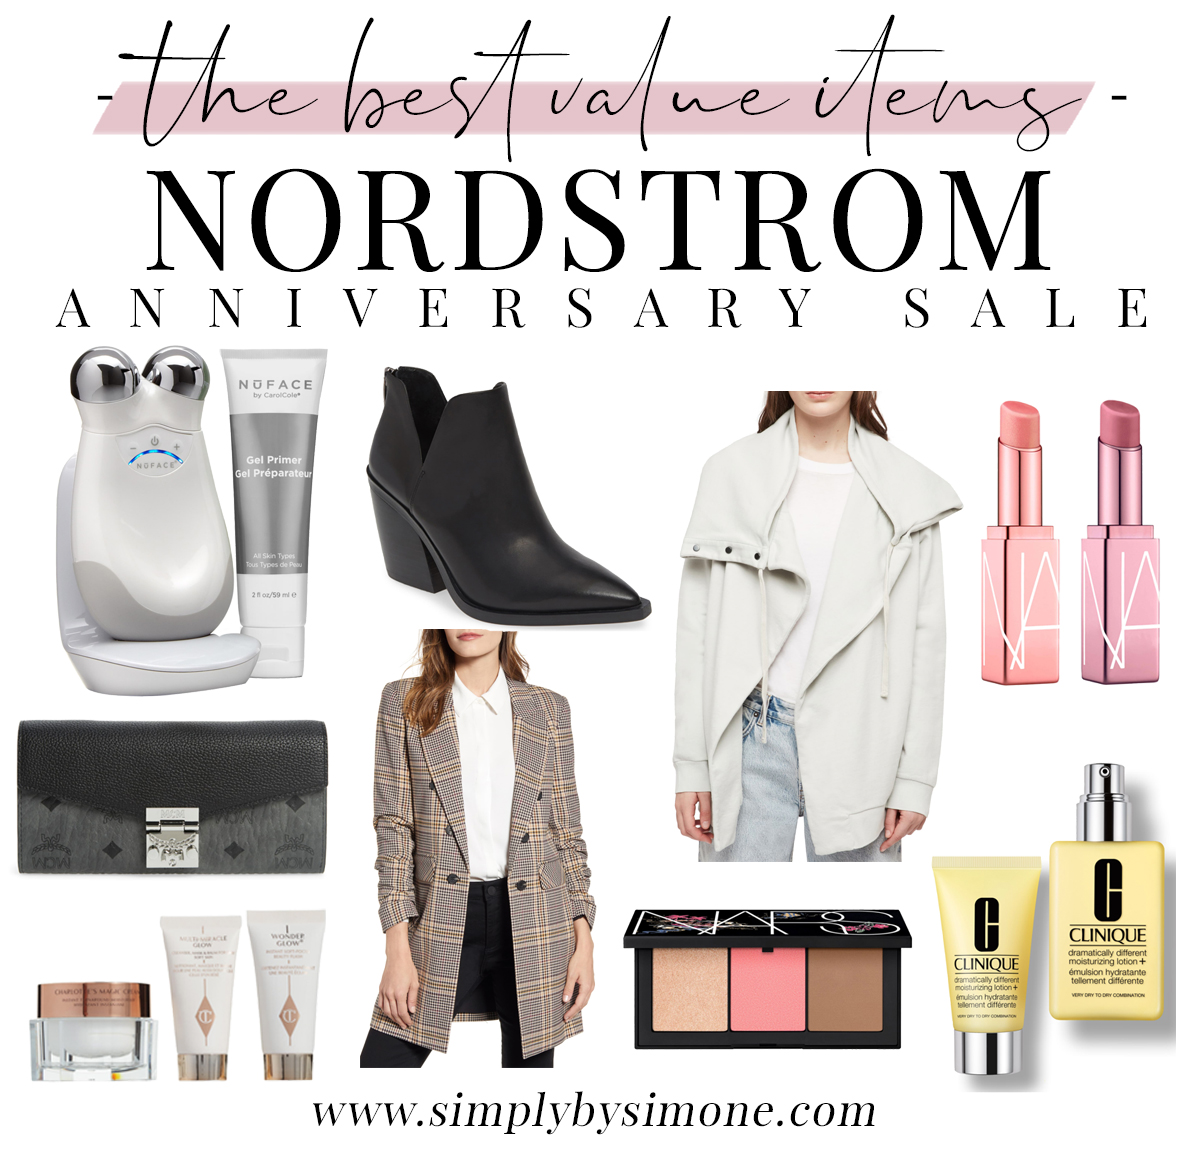 Quality Over Quantity - My Fall 2019 NSALE Picks - #nordstrom #nsale #nsale2019 #shopping #sale #accessories #designer #couponcode #shopthepost #outfit #fashion #style #falloutfit #fallstyle #blazer #plussize #nordysgirl